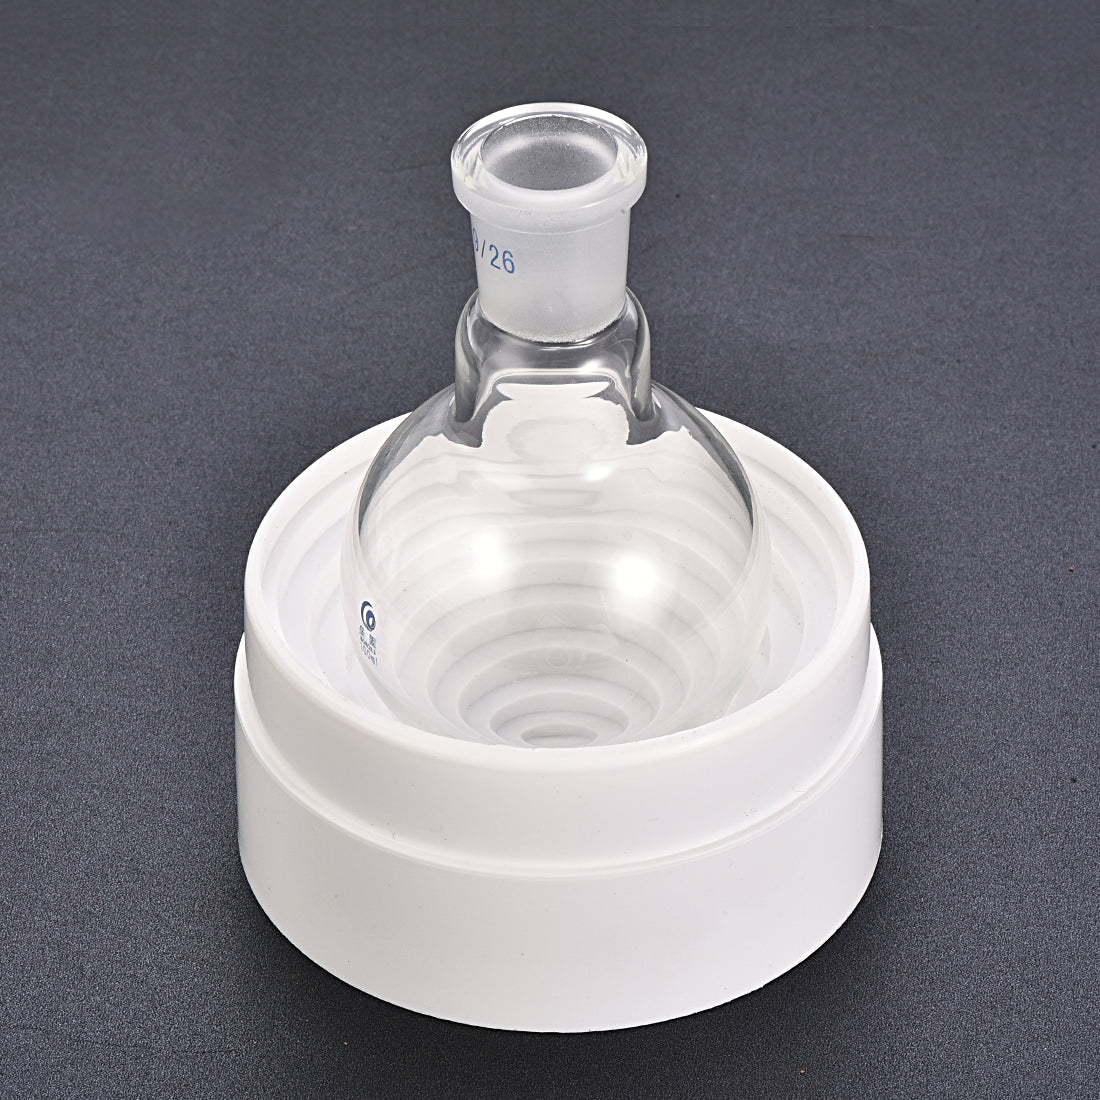 uxcell Uxcell Lab Flask Support Plastic Stand 160mm Diameter Round Bottom Holder for 250ml-20000ml Flasks White